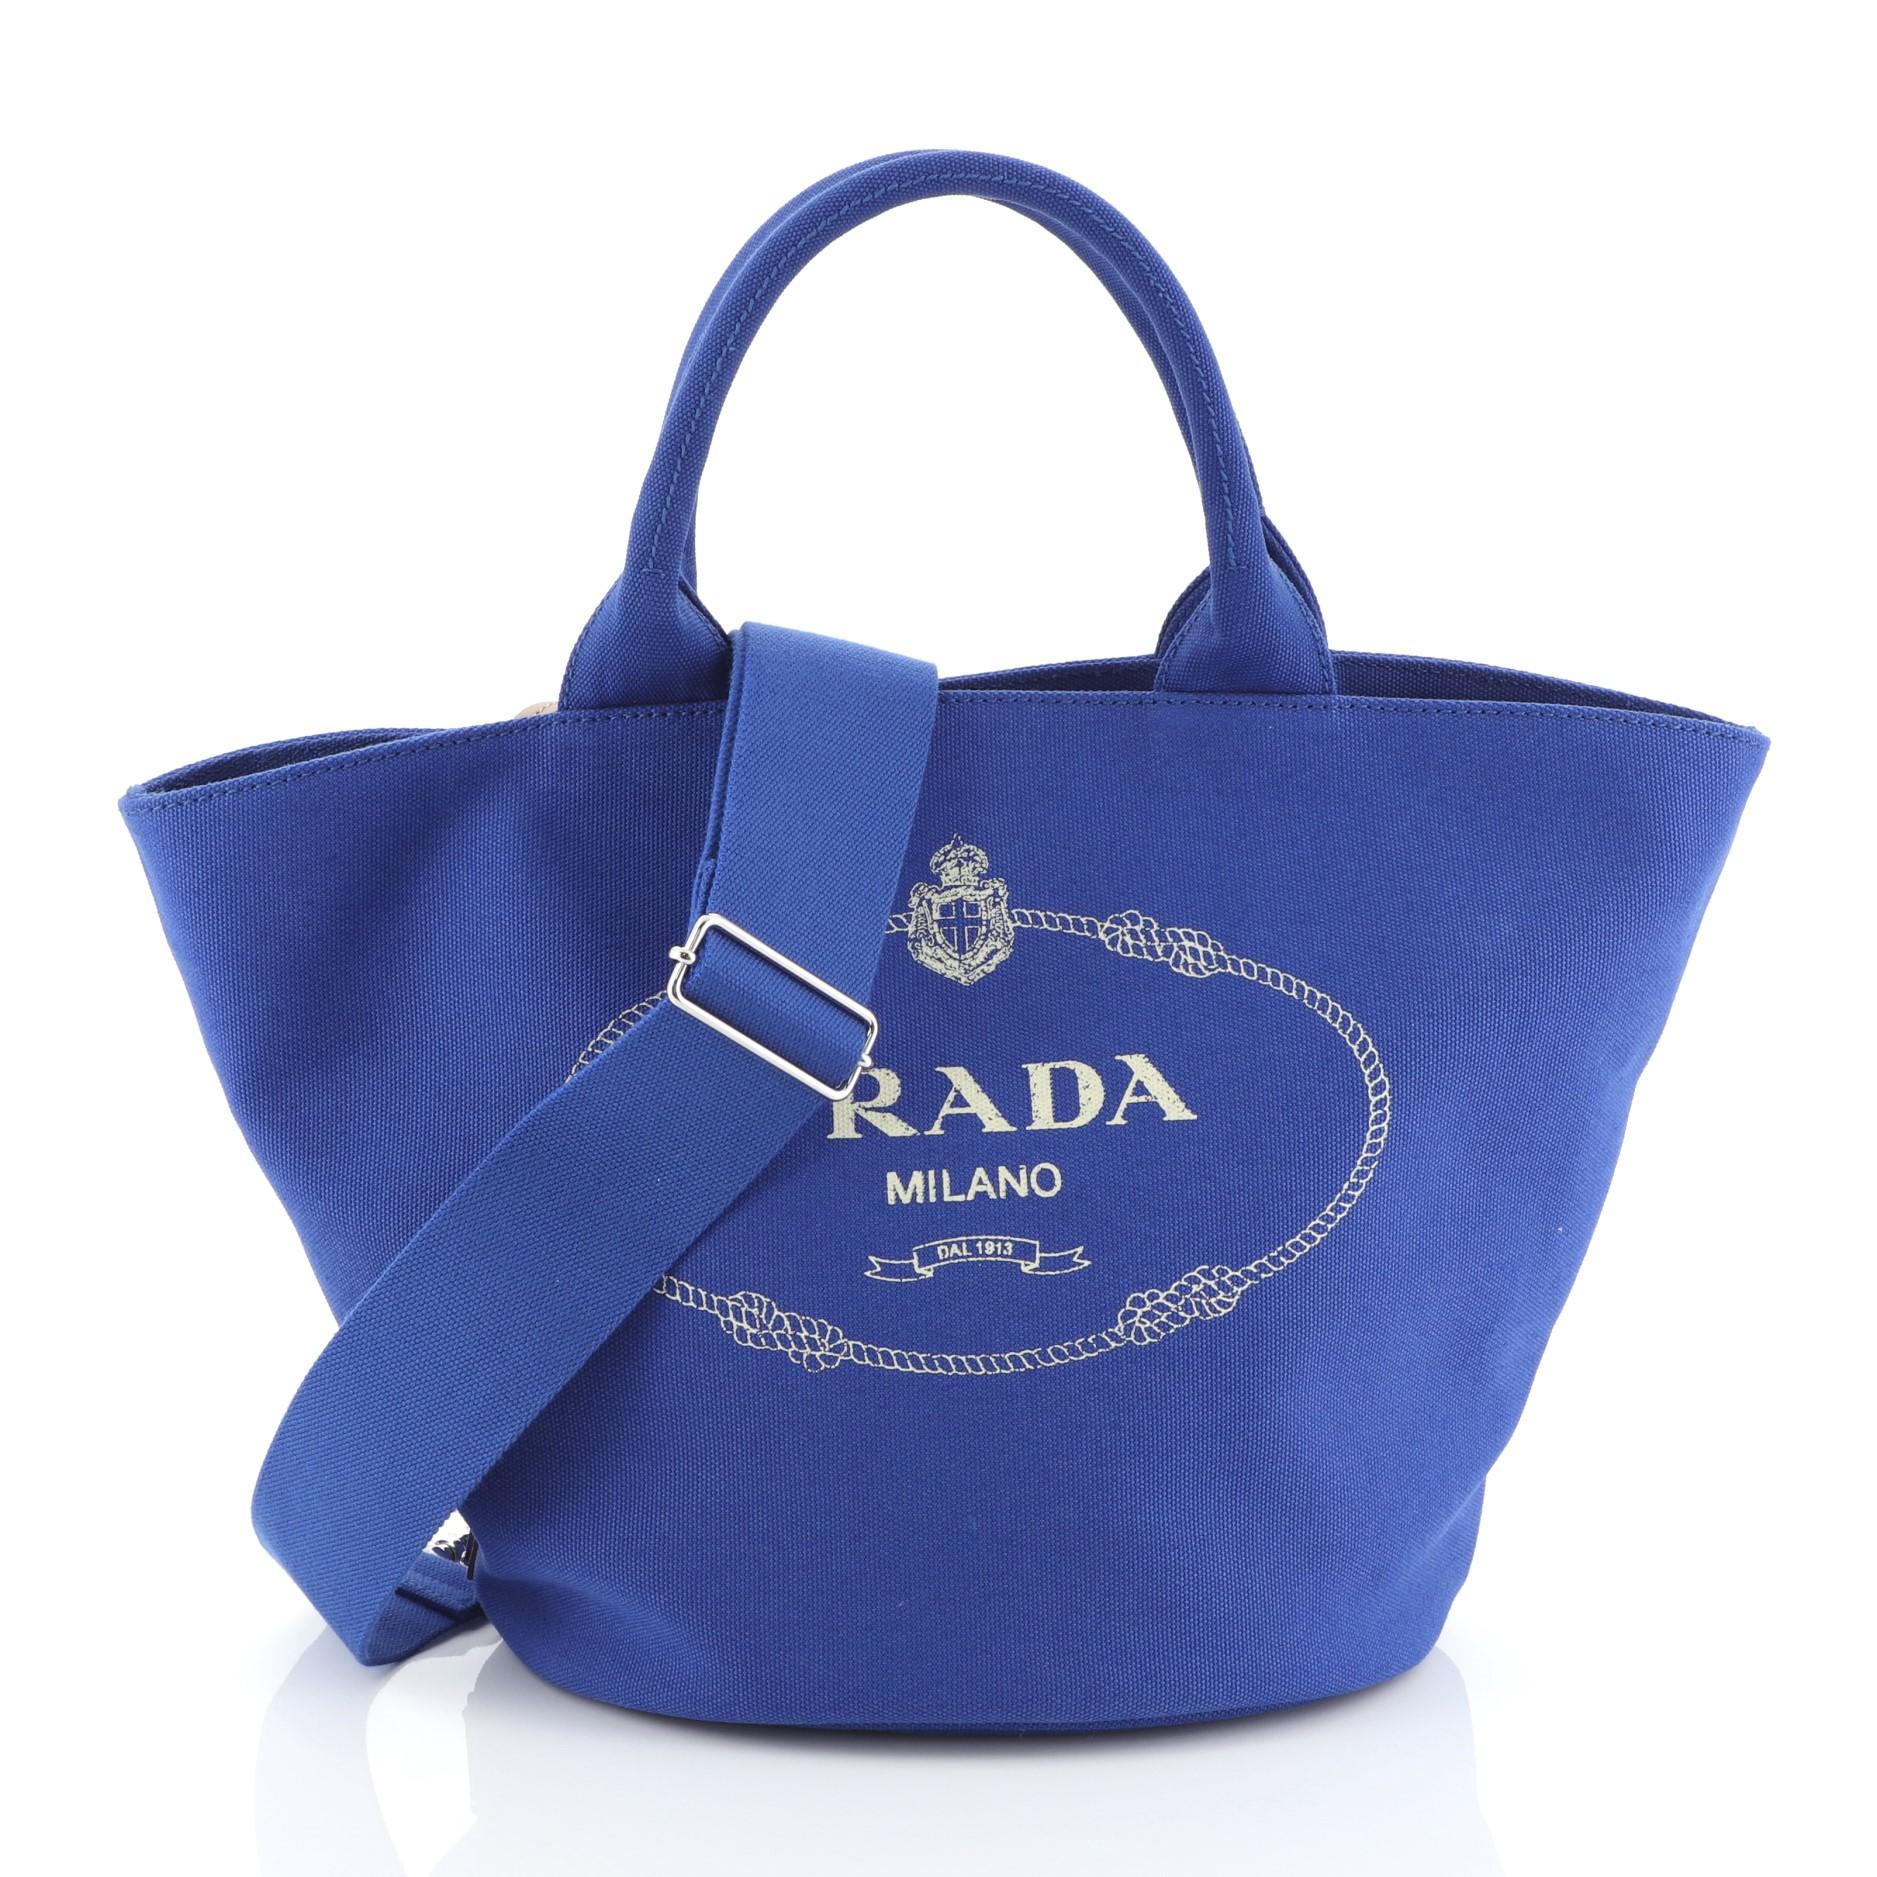 This Prada Canapa Convertible Shopping Tote Canvas Medium, crafted in blue canvas, features dual top handles and silver-tone hardware. It opens to a blue canvas interior with side zip pocket. 

Estimated Retail Price: $950
Condition: Great. Wear on